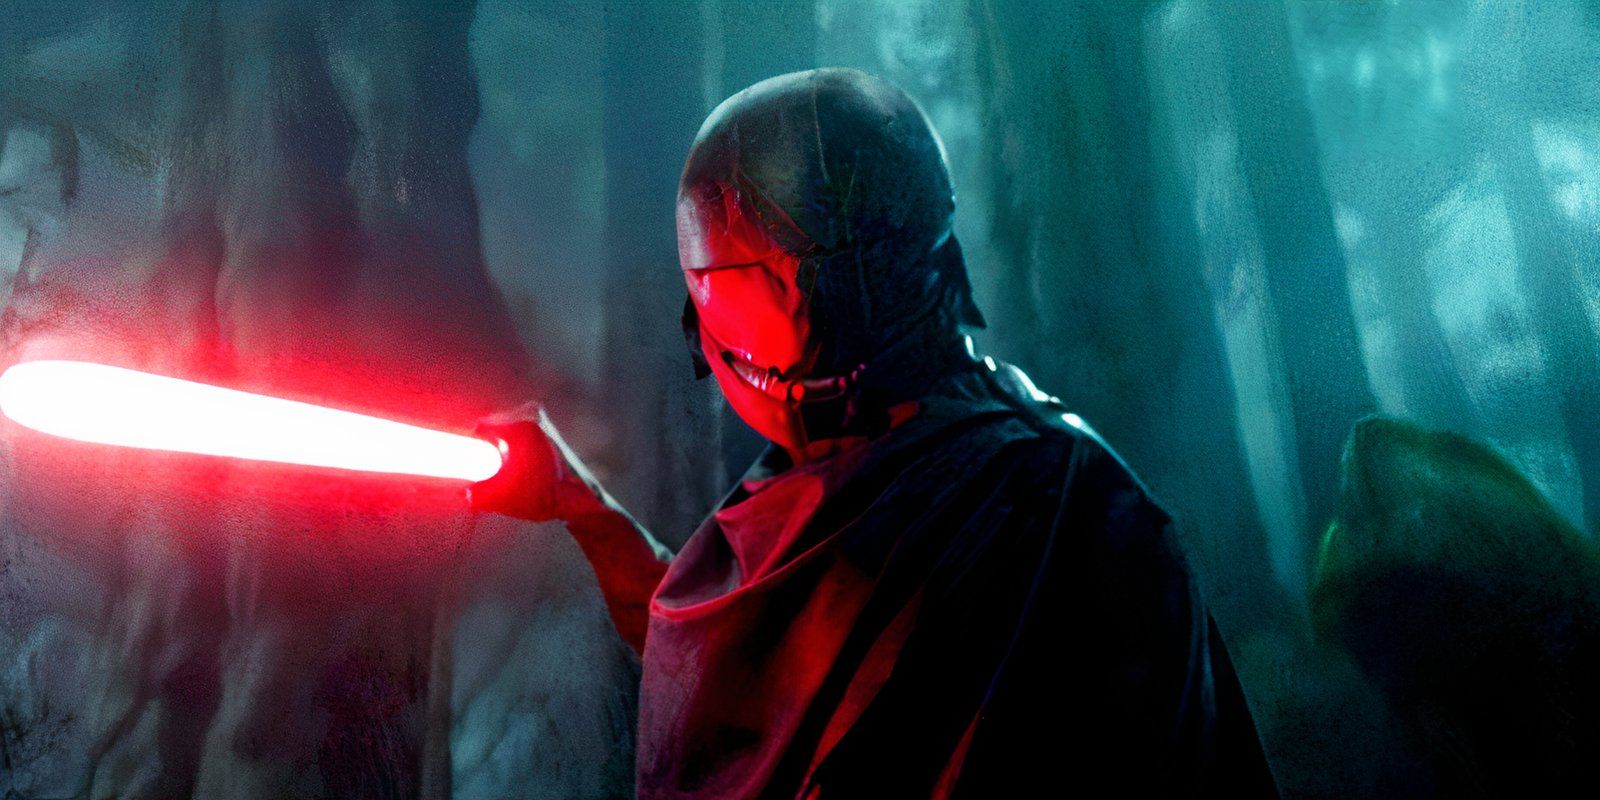 The Stranger aims his red lightsaber at Mae in The Acolyte episode 5